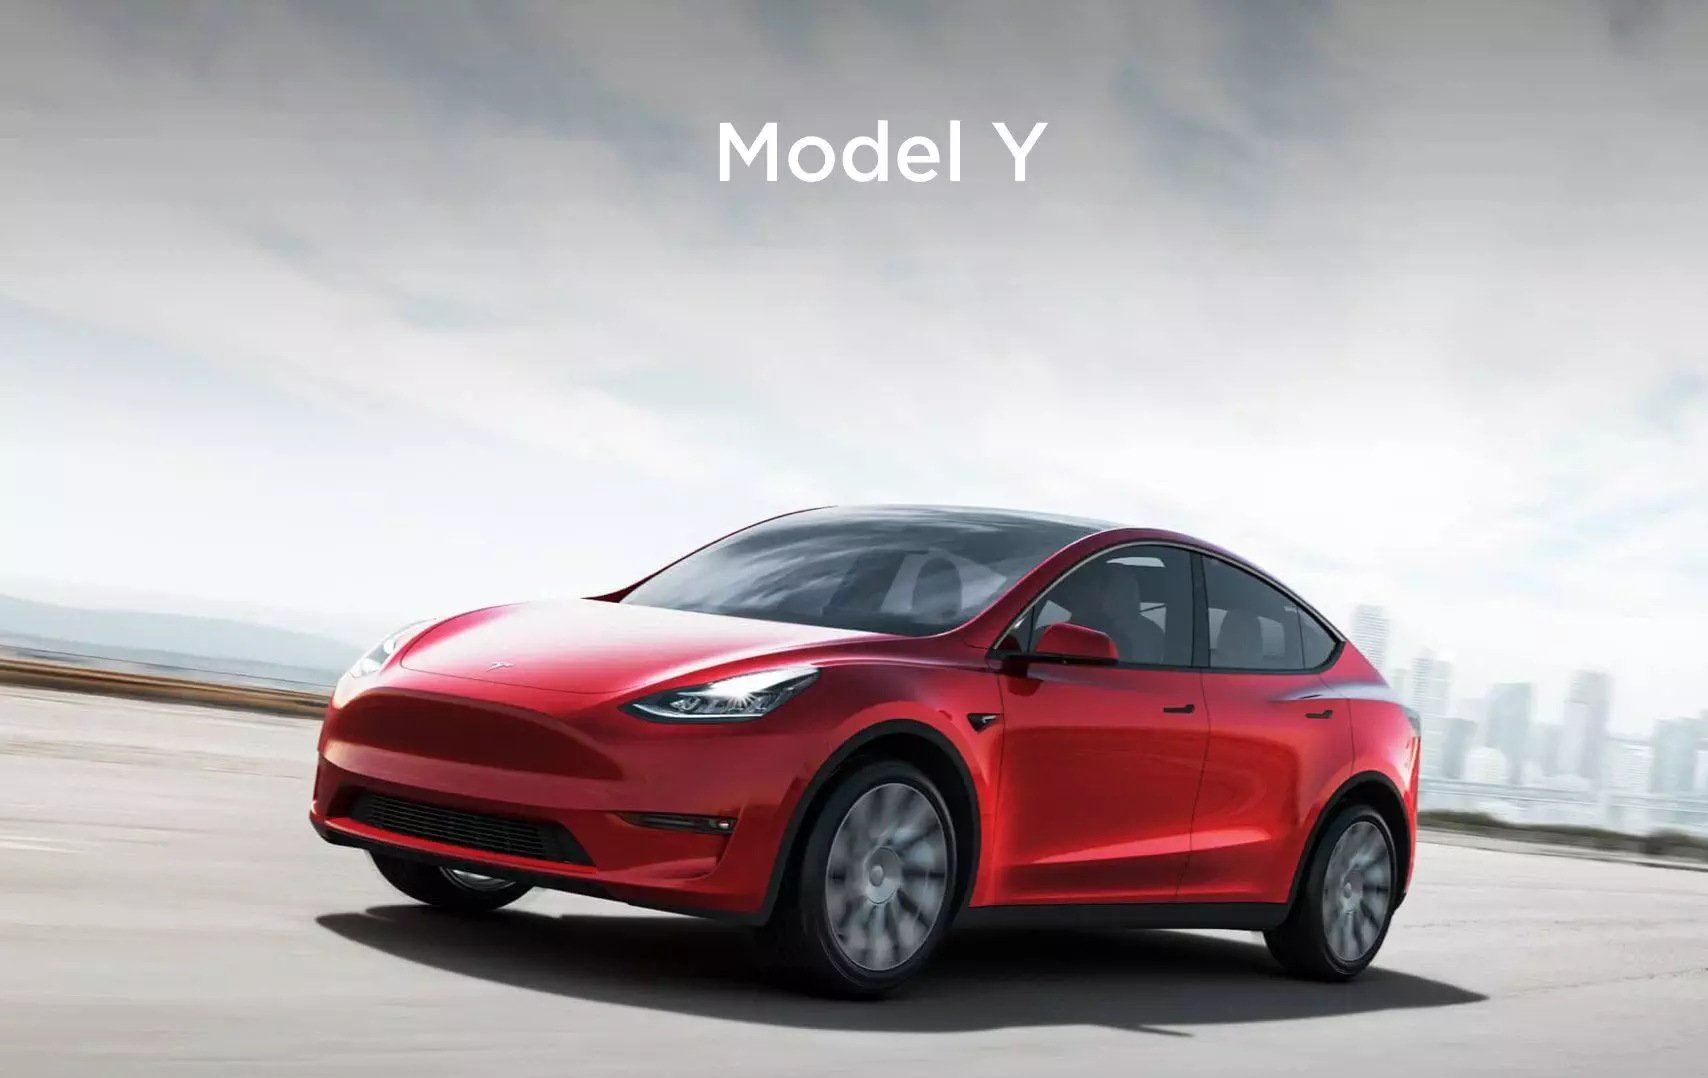 Model Y almost here